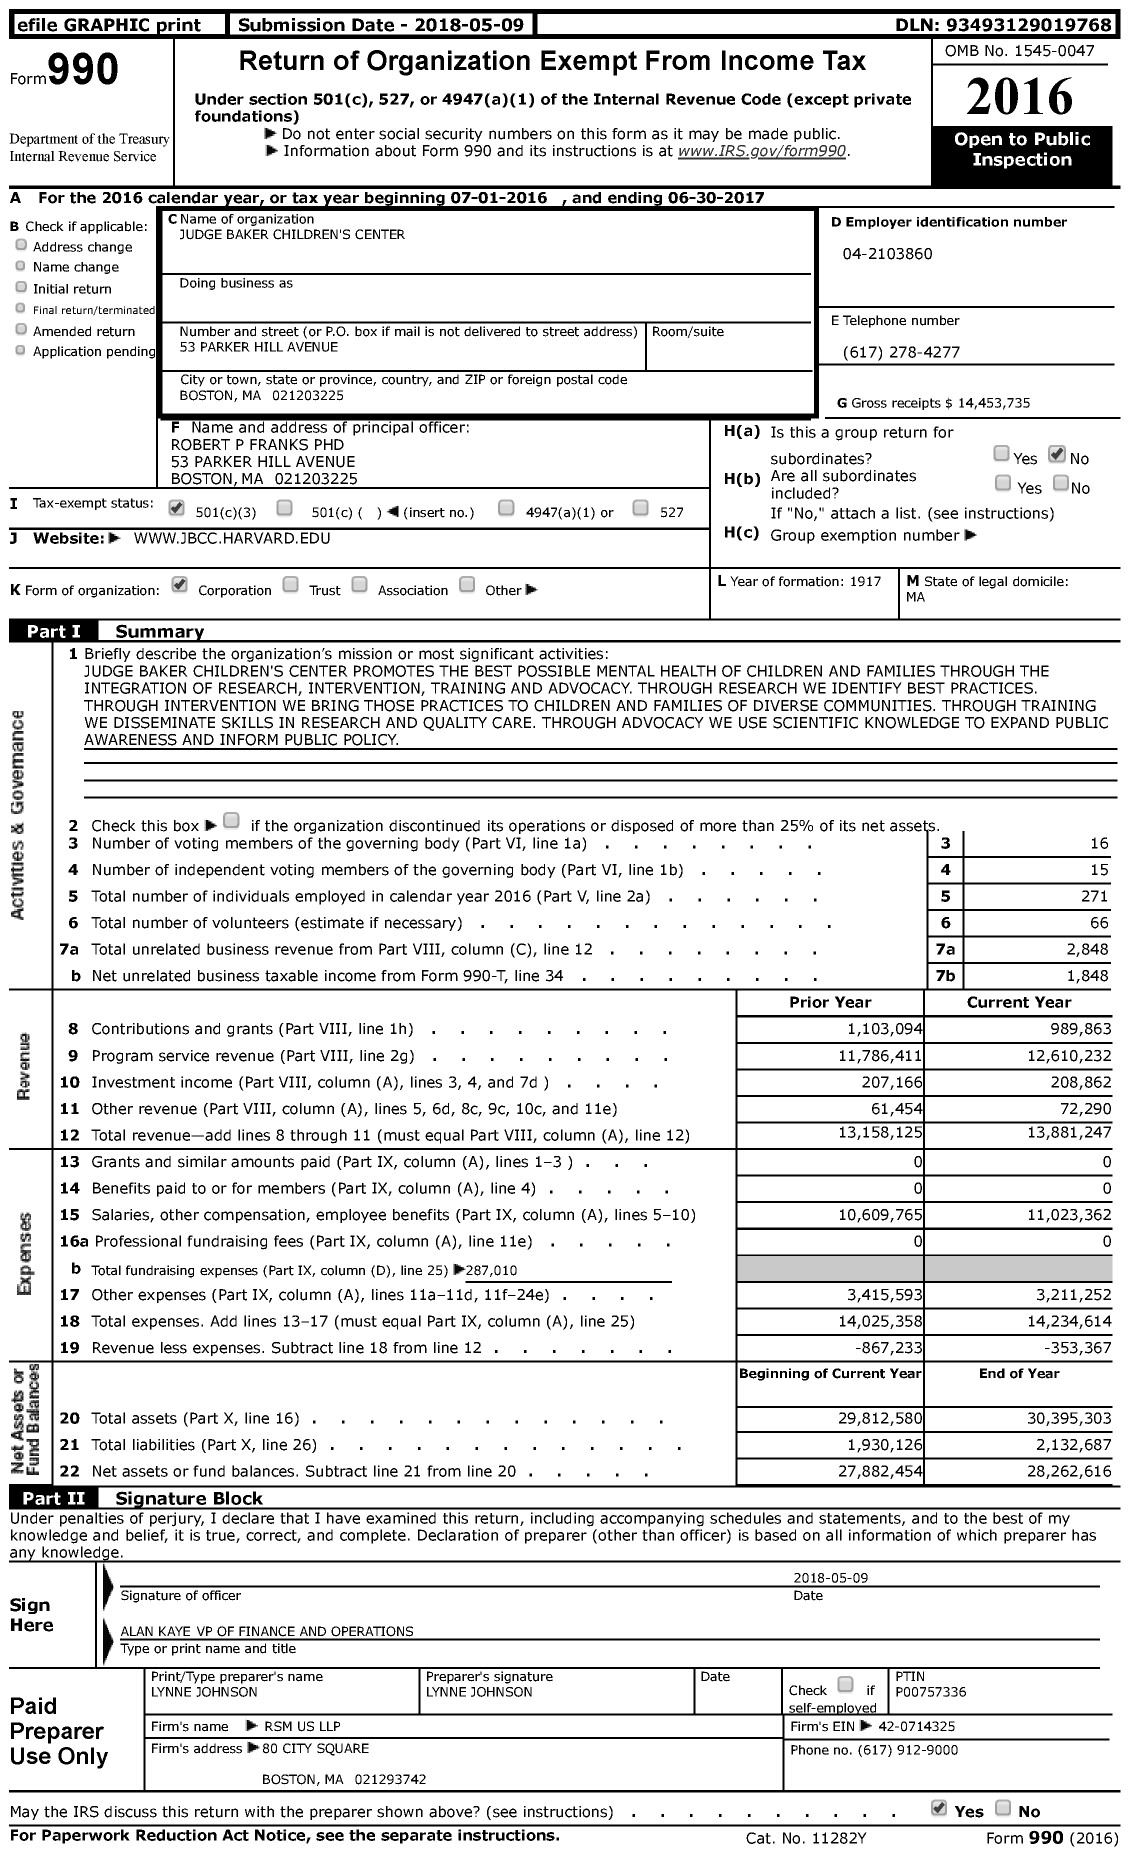 Image of first page of 2016 Form 990 for The Baker Center for Children and Families (JBCC)